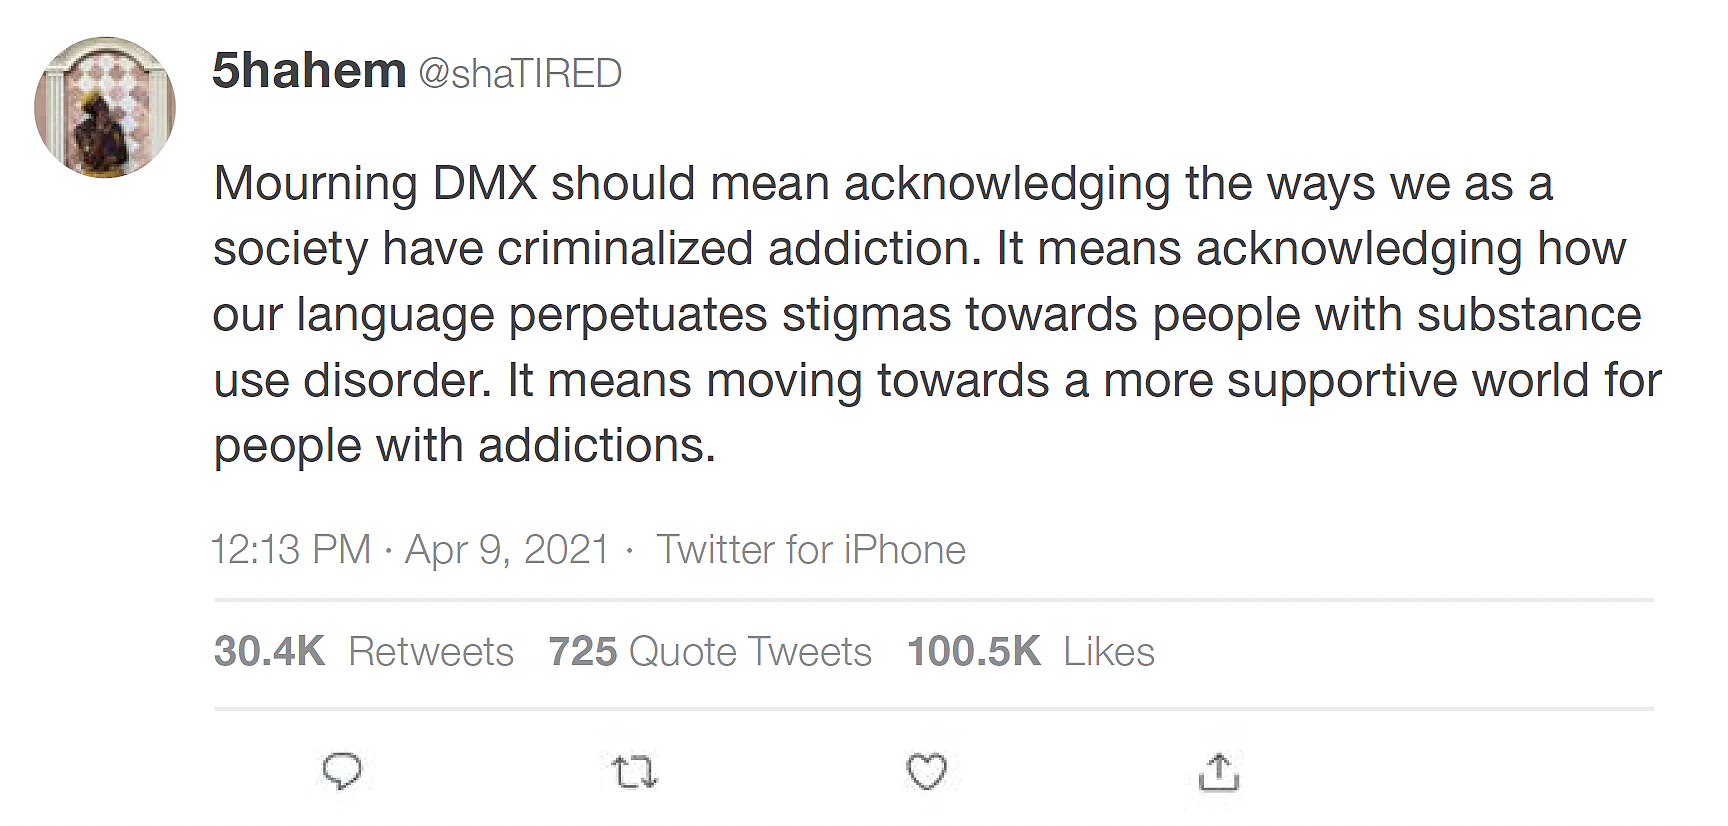 Tweet by Twitter user @shaTIRED that says: "Mourning DMX should mean acknowledging the ways we as a society have criminalized addiction. It means acknowledging how our language perpetuates stigmas towards people with substance use disorder. It means moving towards a more supportive world for people with addictions" from 12:13pm on April 9, 2021. At the time the image was acquired, the tweet had 30.4K retweets, 725 quote tweets, and 100.5K likes.